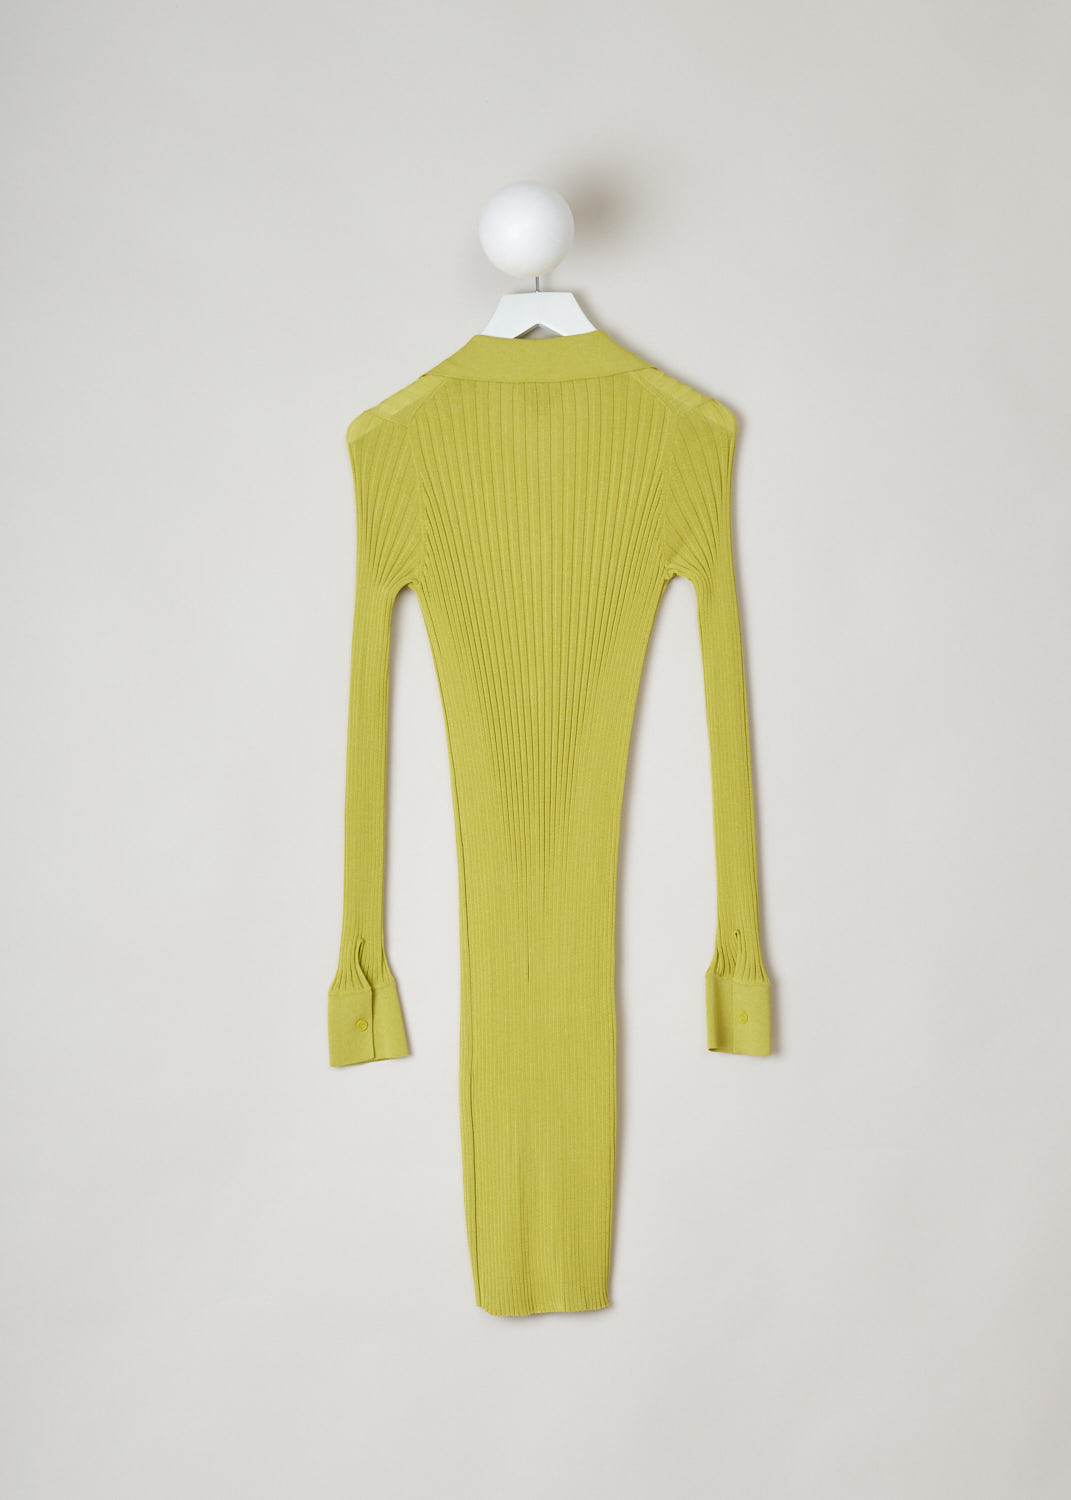 Bottega Veneta, Yellow ribbed blouse dress, 637824_V06P0_7275, yellow, back, Skin tight blouse dress featuring a ribbed weaving pattern, pointed collar and long cuffed sleeves supporting a single button. The fastening option on this model are the decorative press buttons on the front. 